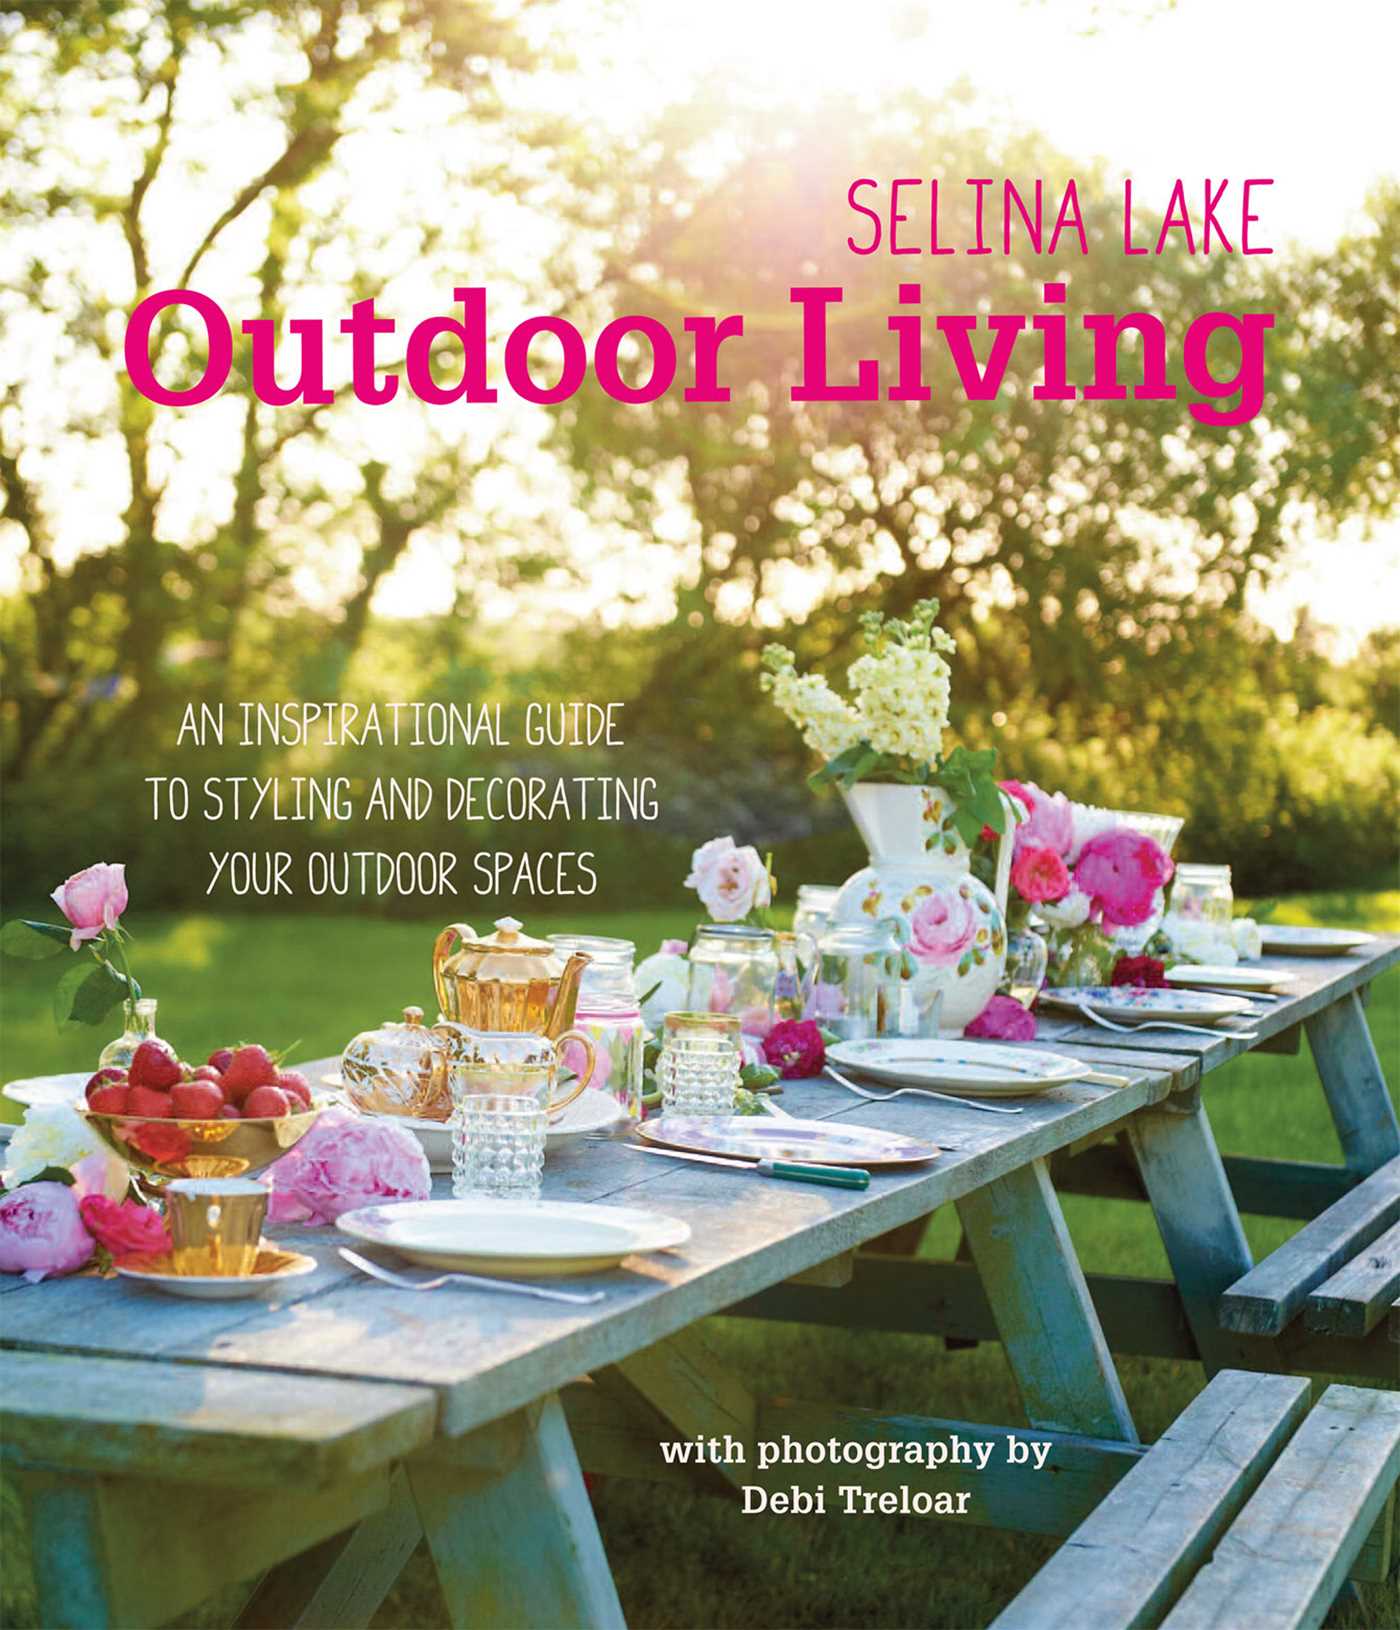 Selina Lake Outdoor Living - An inspirational guide to styling and decorating your outdoor spaces